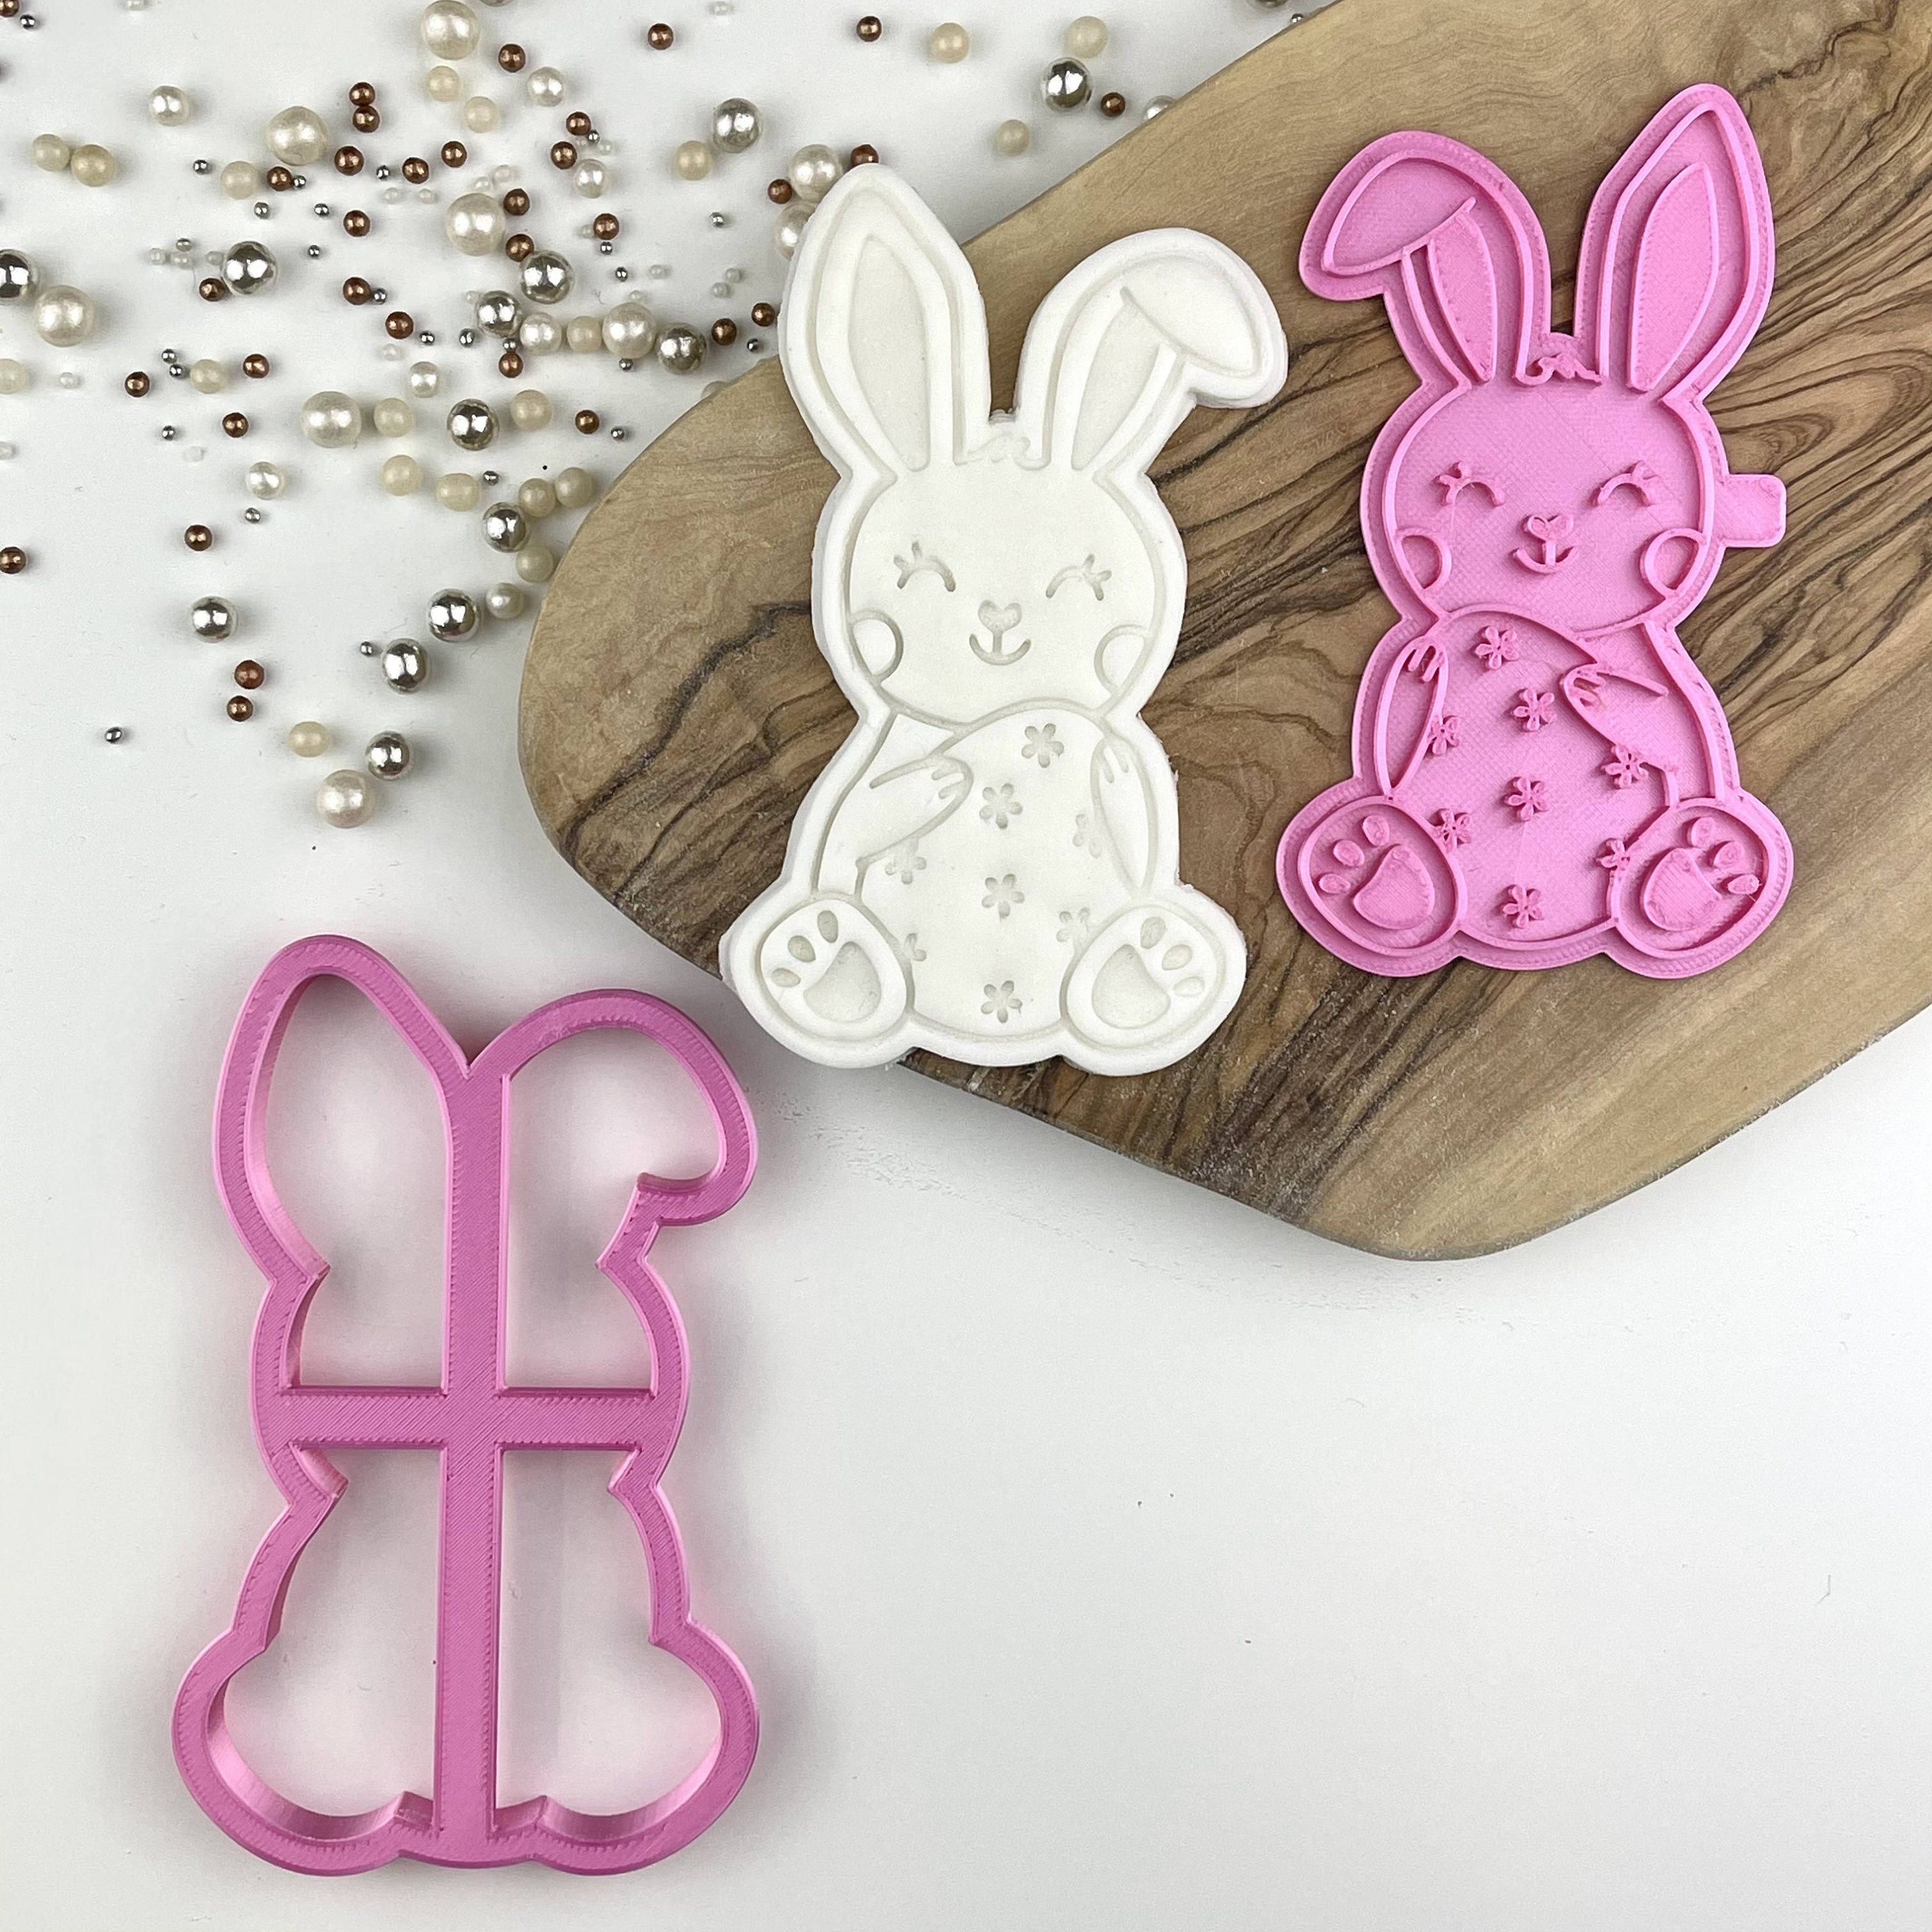 Happy Easter Four Easter Rabbit Friends Cookie Cutter Postal Box Ideas Happy Easter Cookie Stamp Easter Cookie Embosser